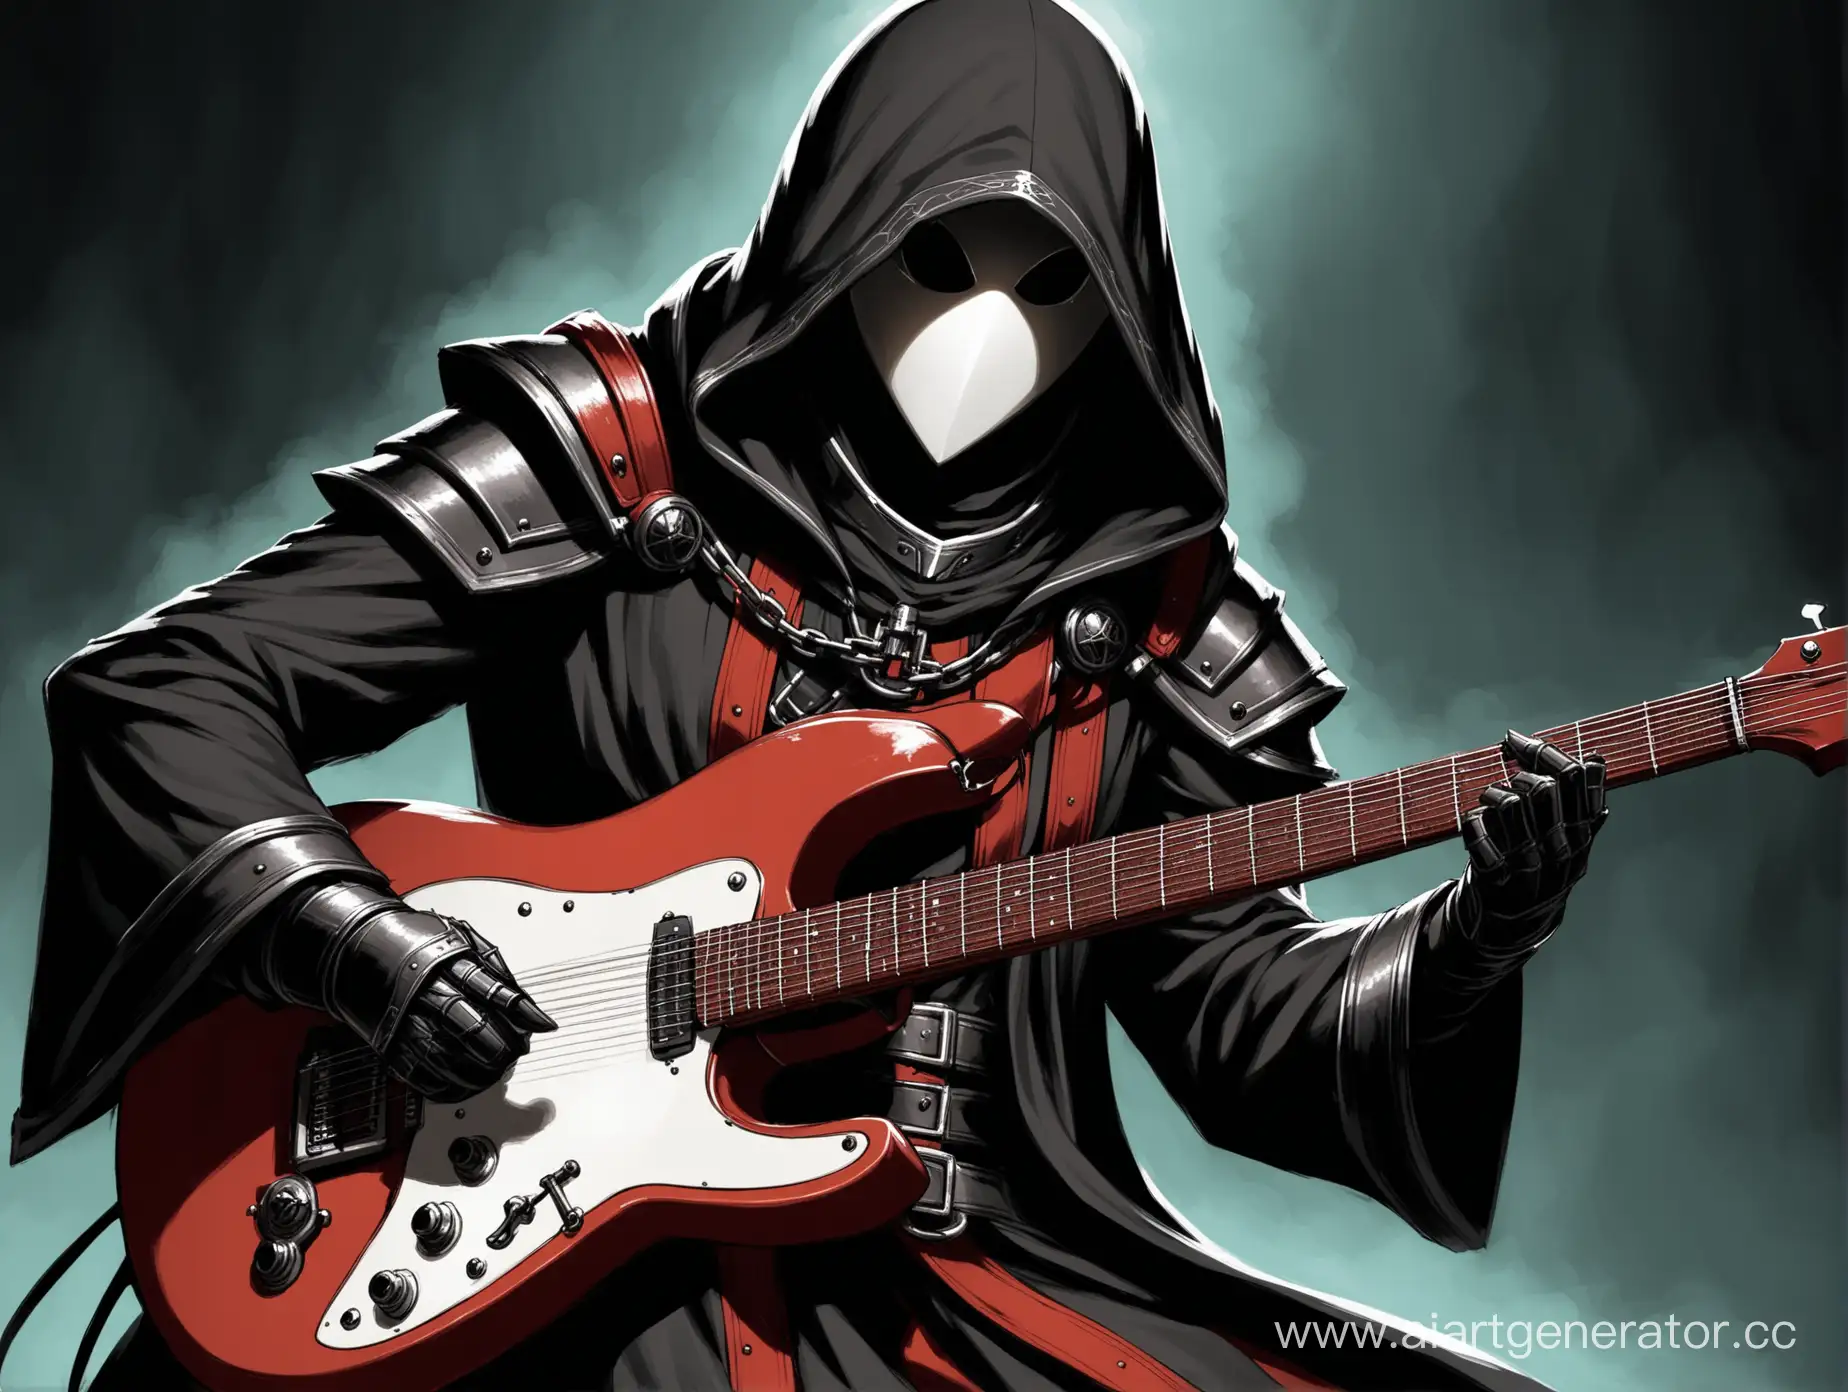 Inquisitor-Playing-Guitar-with-Hooded-Attire